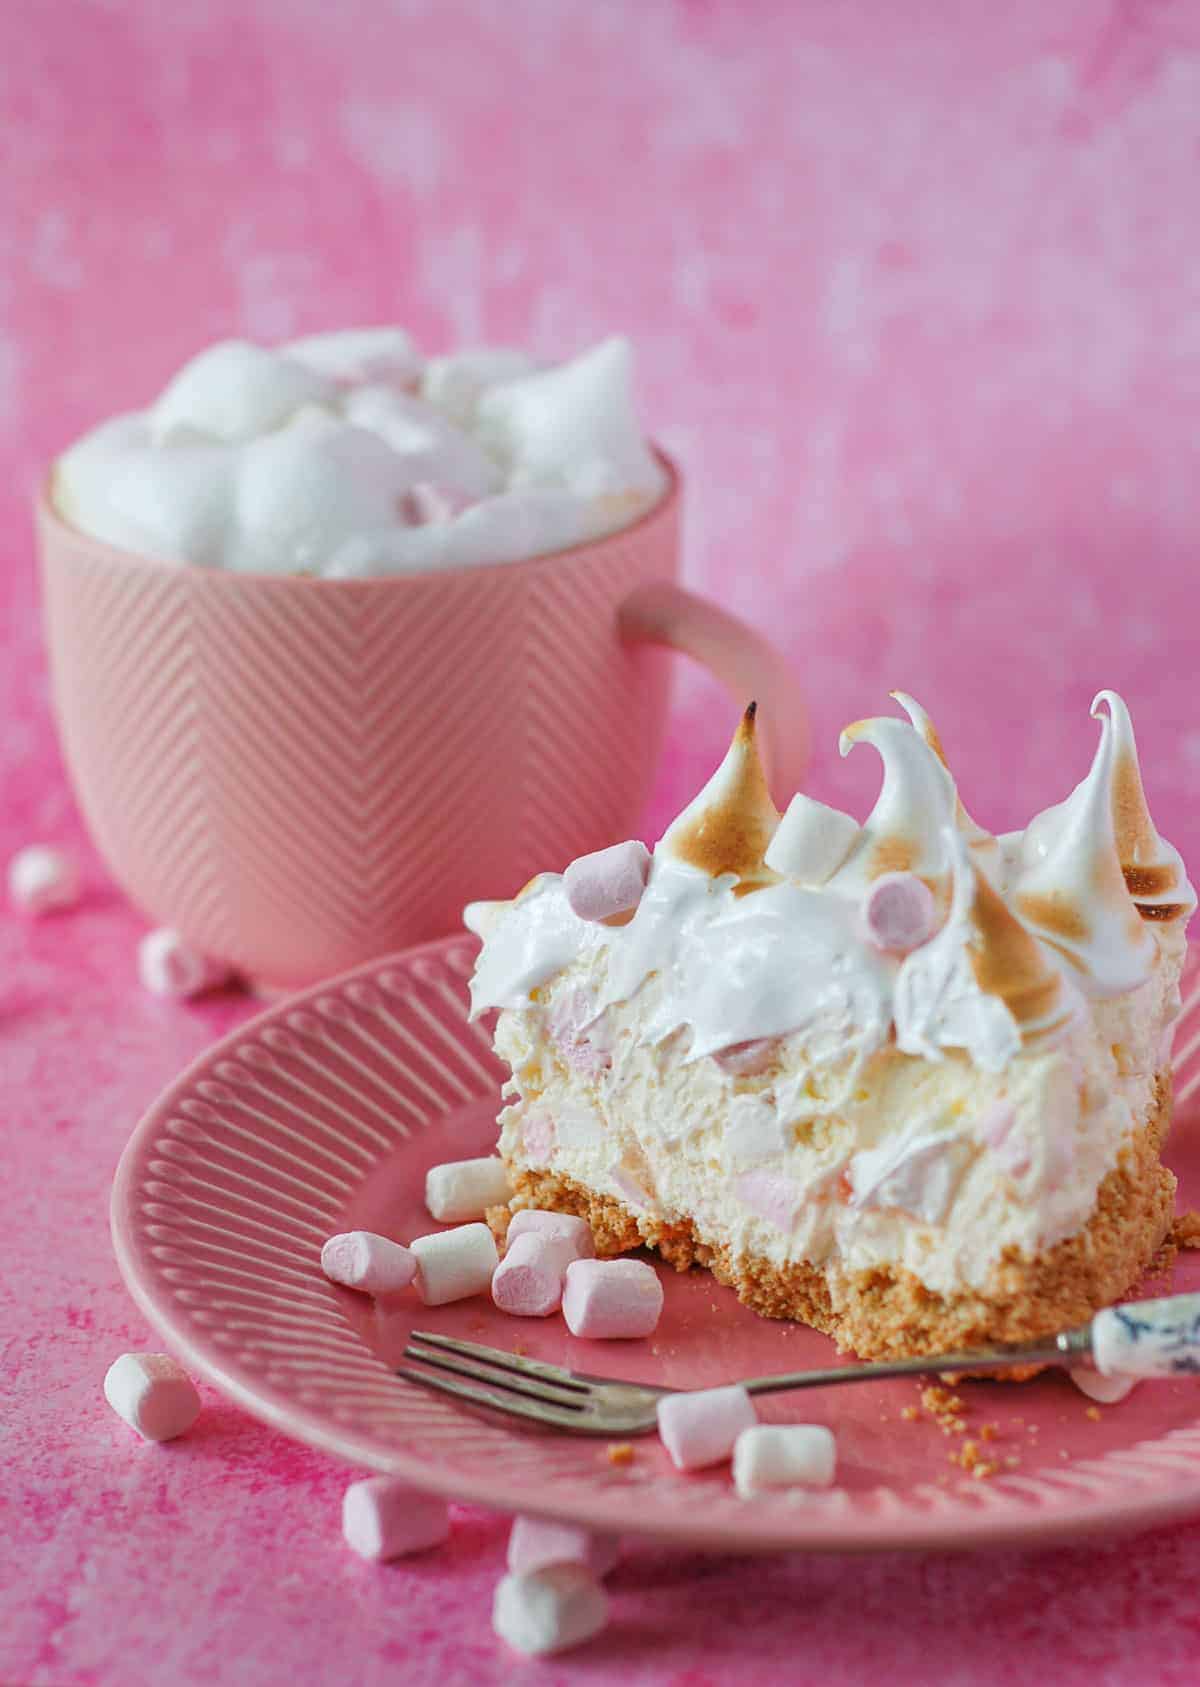 A slice of marshmallow tart on a pink plate with a mug of coffee in the background.
